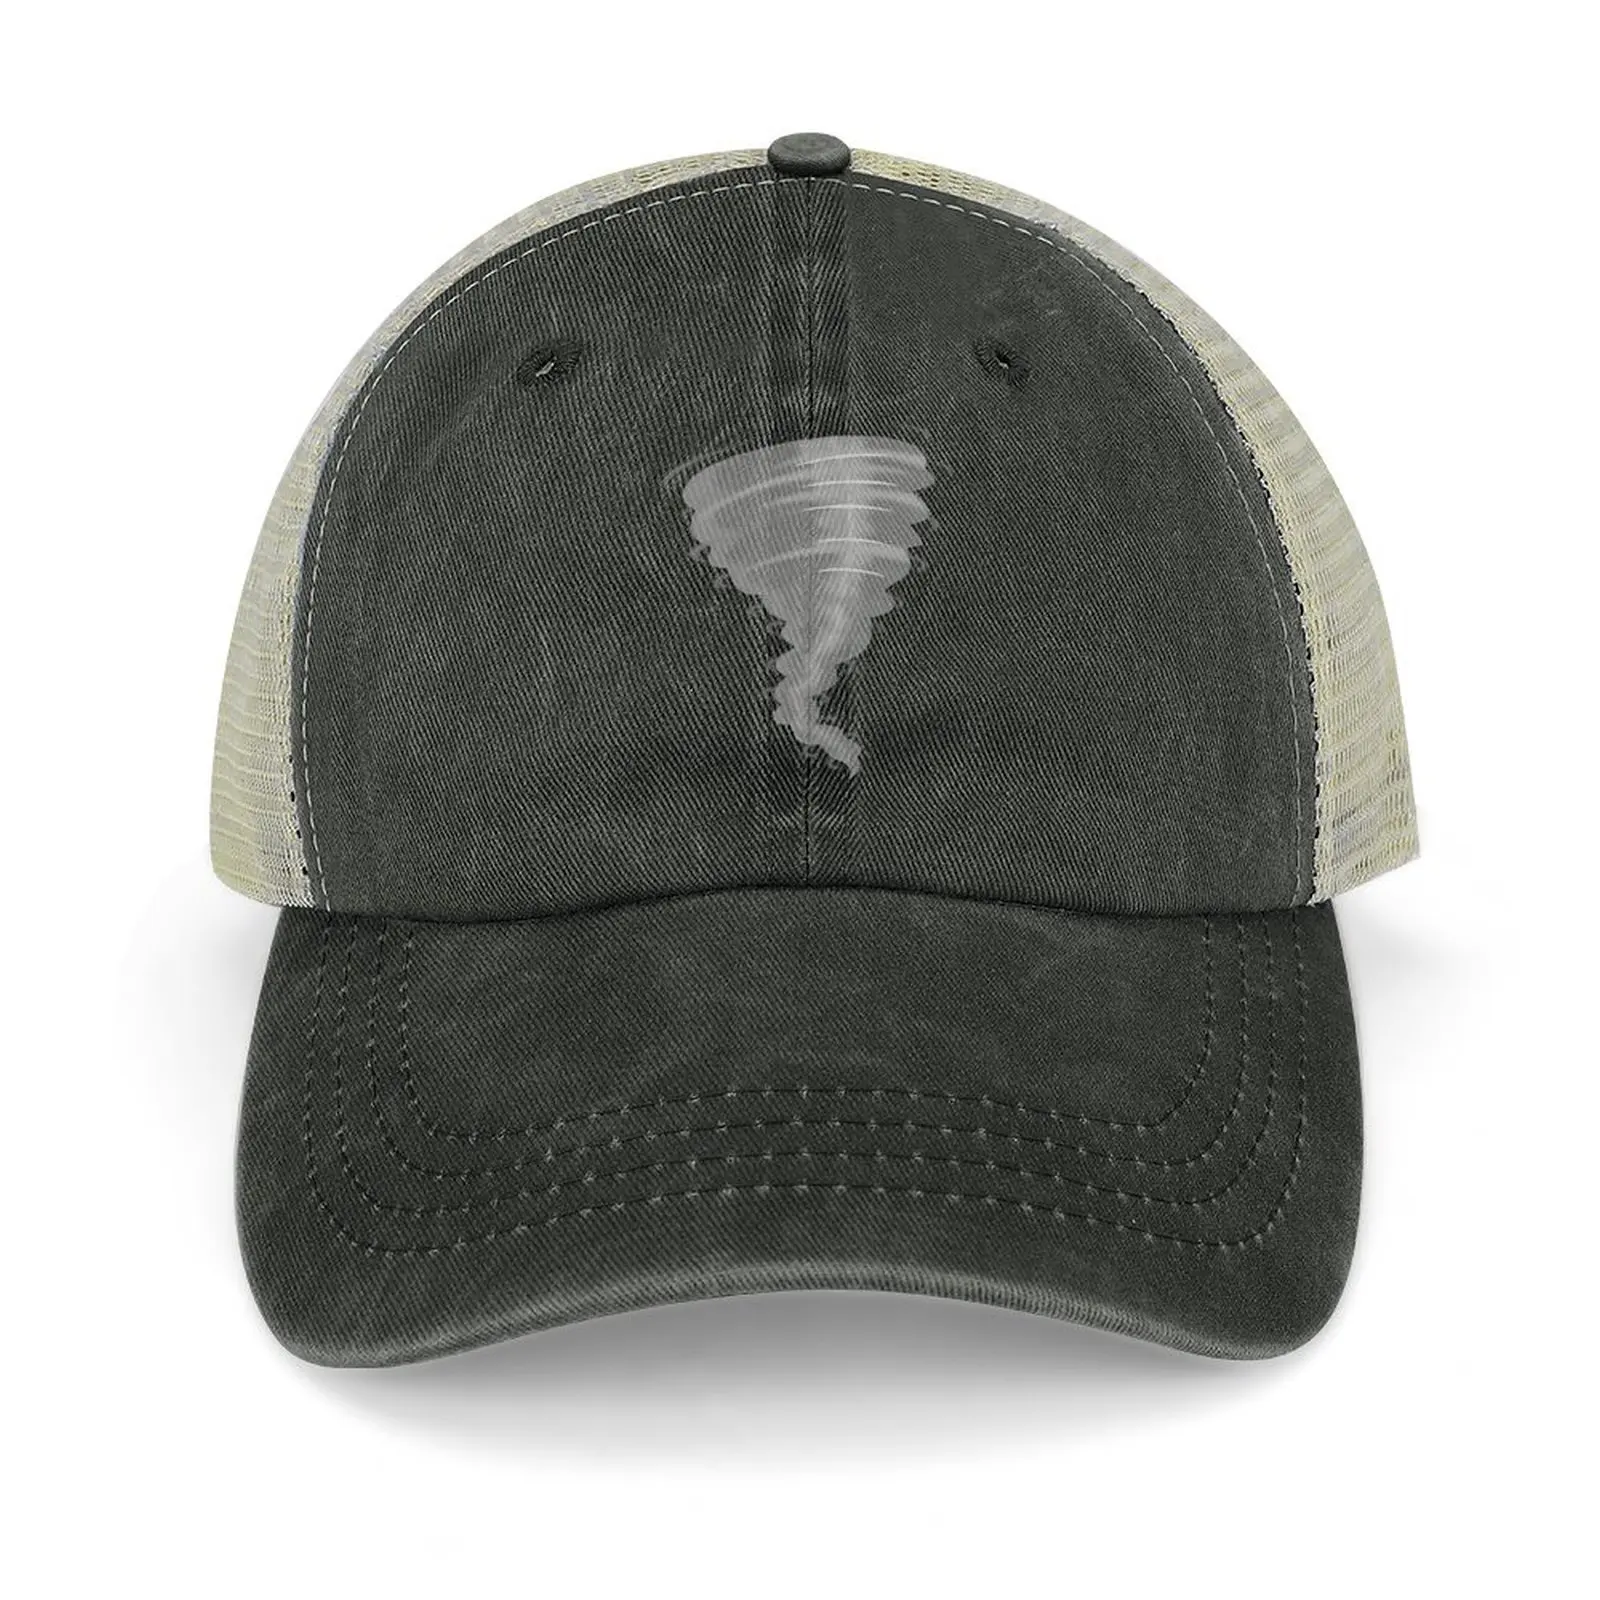 

Tornado - Storm Chaser - Scary Weather Hurricane Cowboy Hat Military Tactical Cap fishing hat Trucker Hats For Men Women's